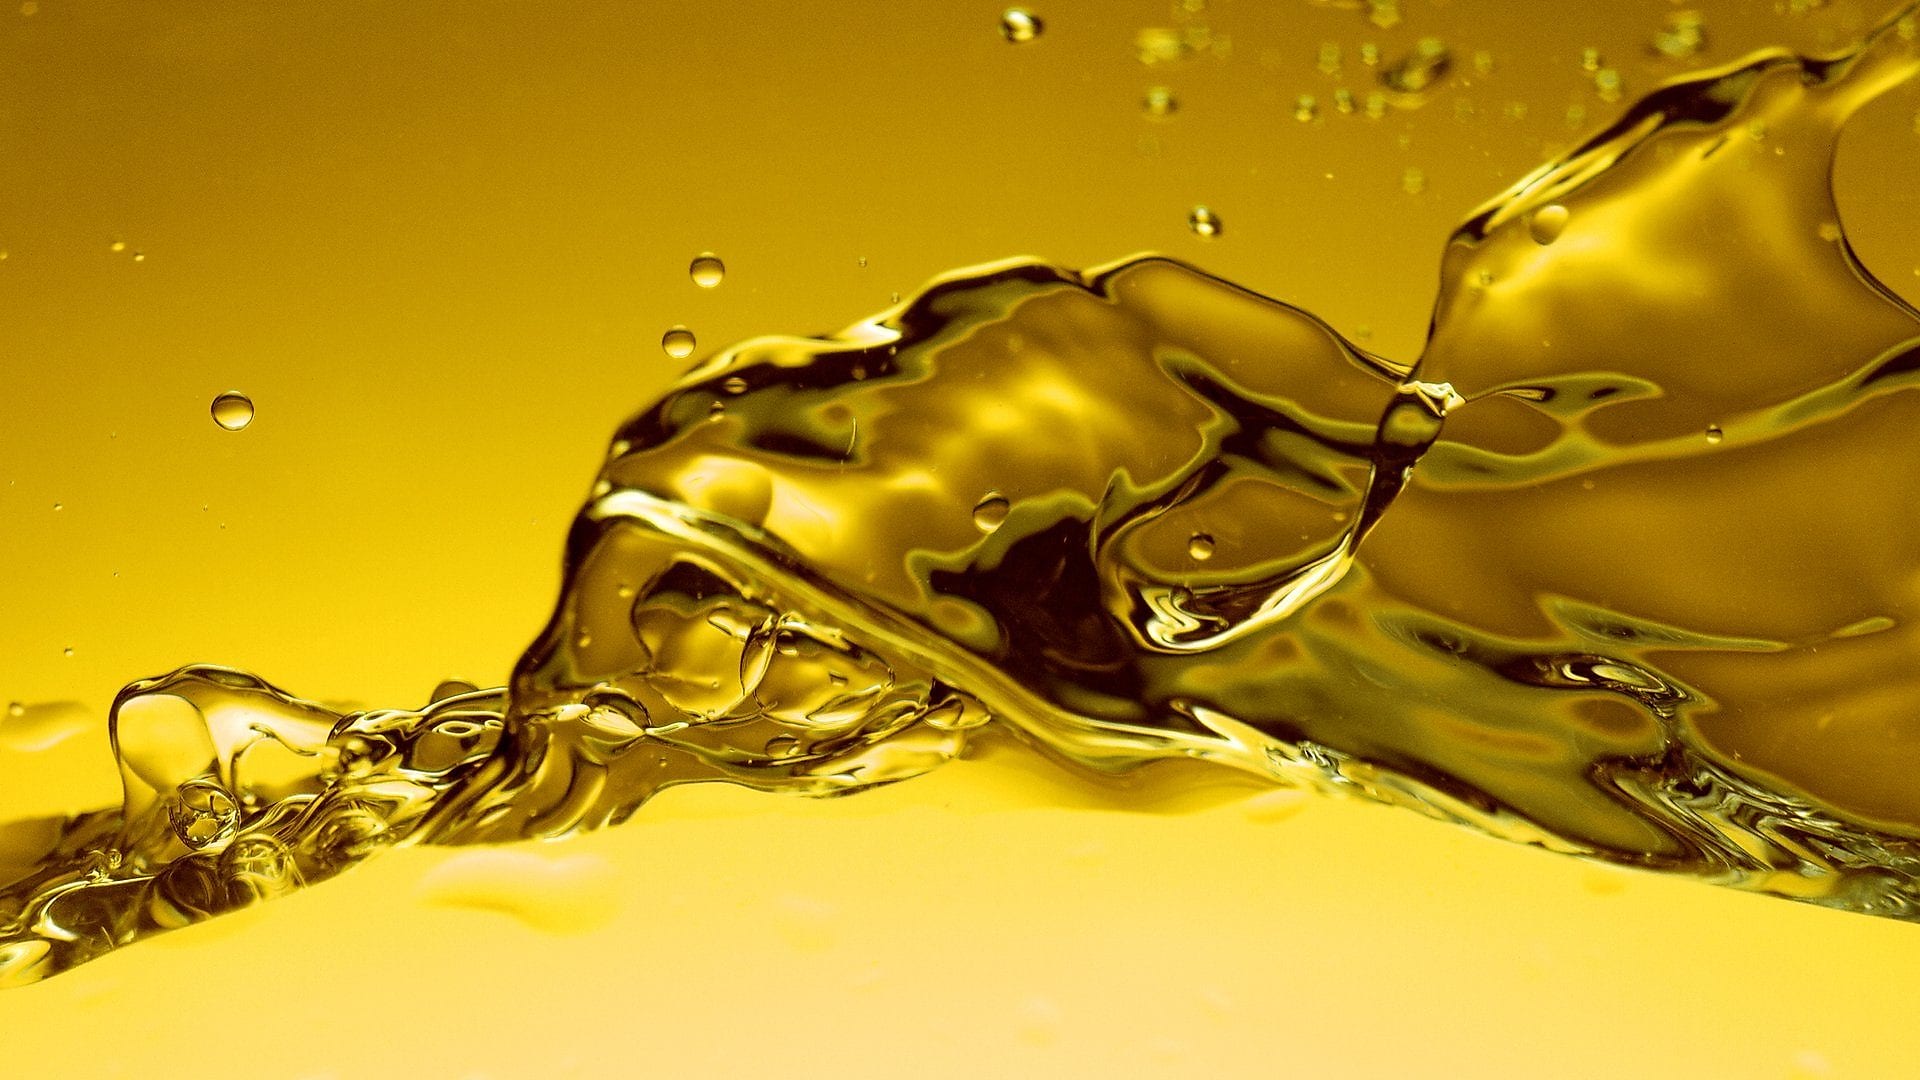 Oil And Lubricants. What Is An Oil Based Lubricant? (with Picture)